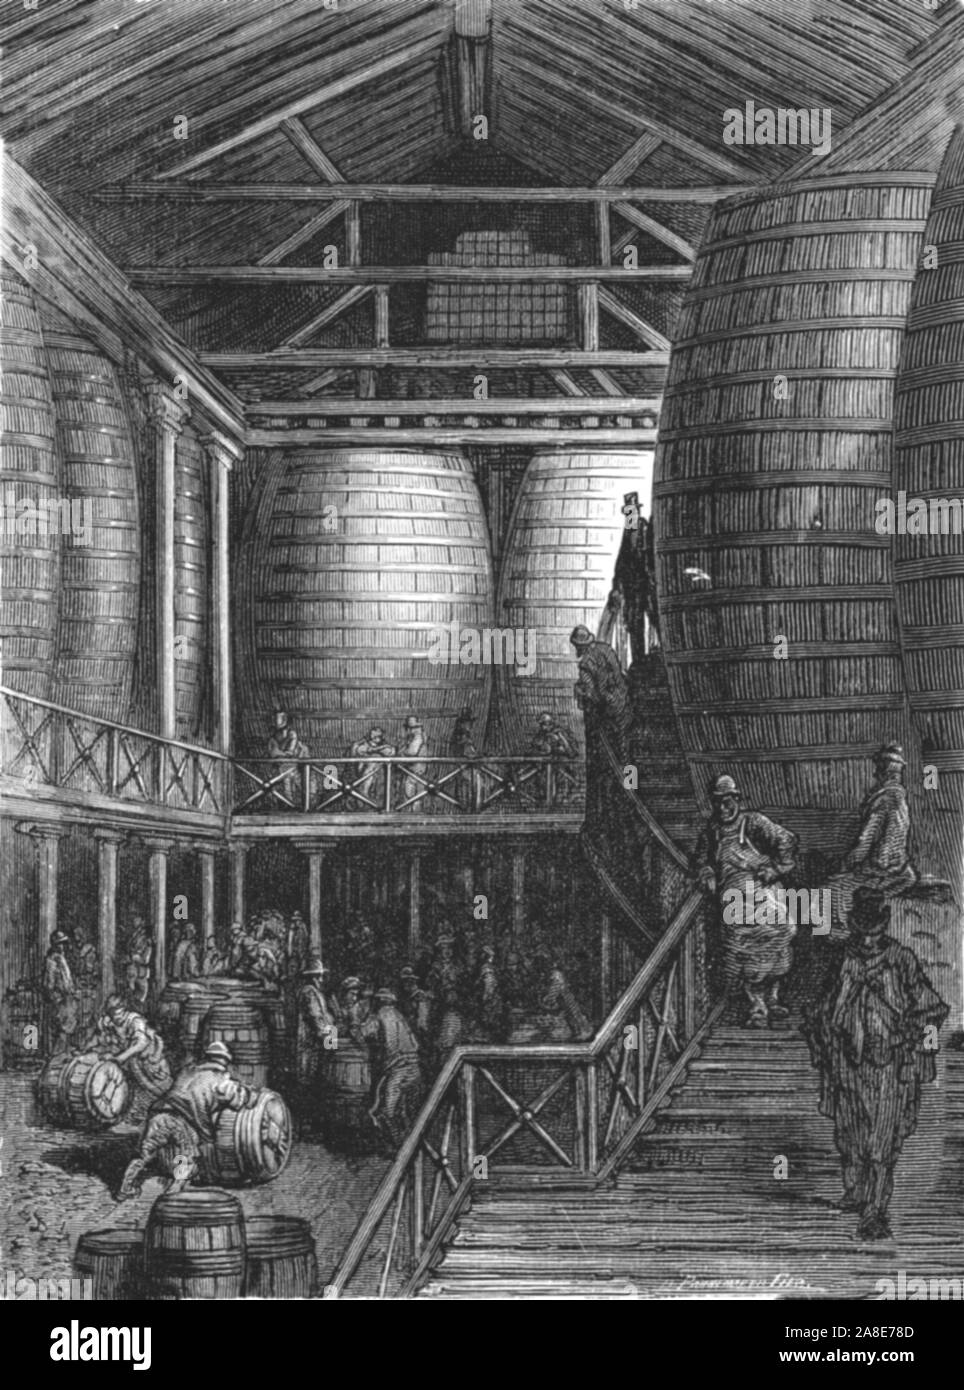 'The Great Vats', 1872. Fermentation tanks at Barclay, Perkins and Company brewery in Park Street, Southwark. From, &quot;LONDON. A Pilgrimage&quot; by Gustave Dore and Blanchard Jerrold. [Grant and Co., 72-78, Turnmill Street, E.C., 1872]. Stock Photo